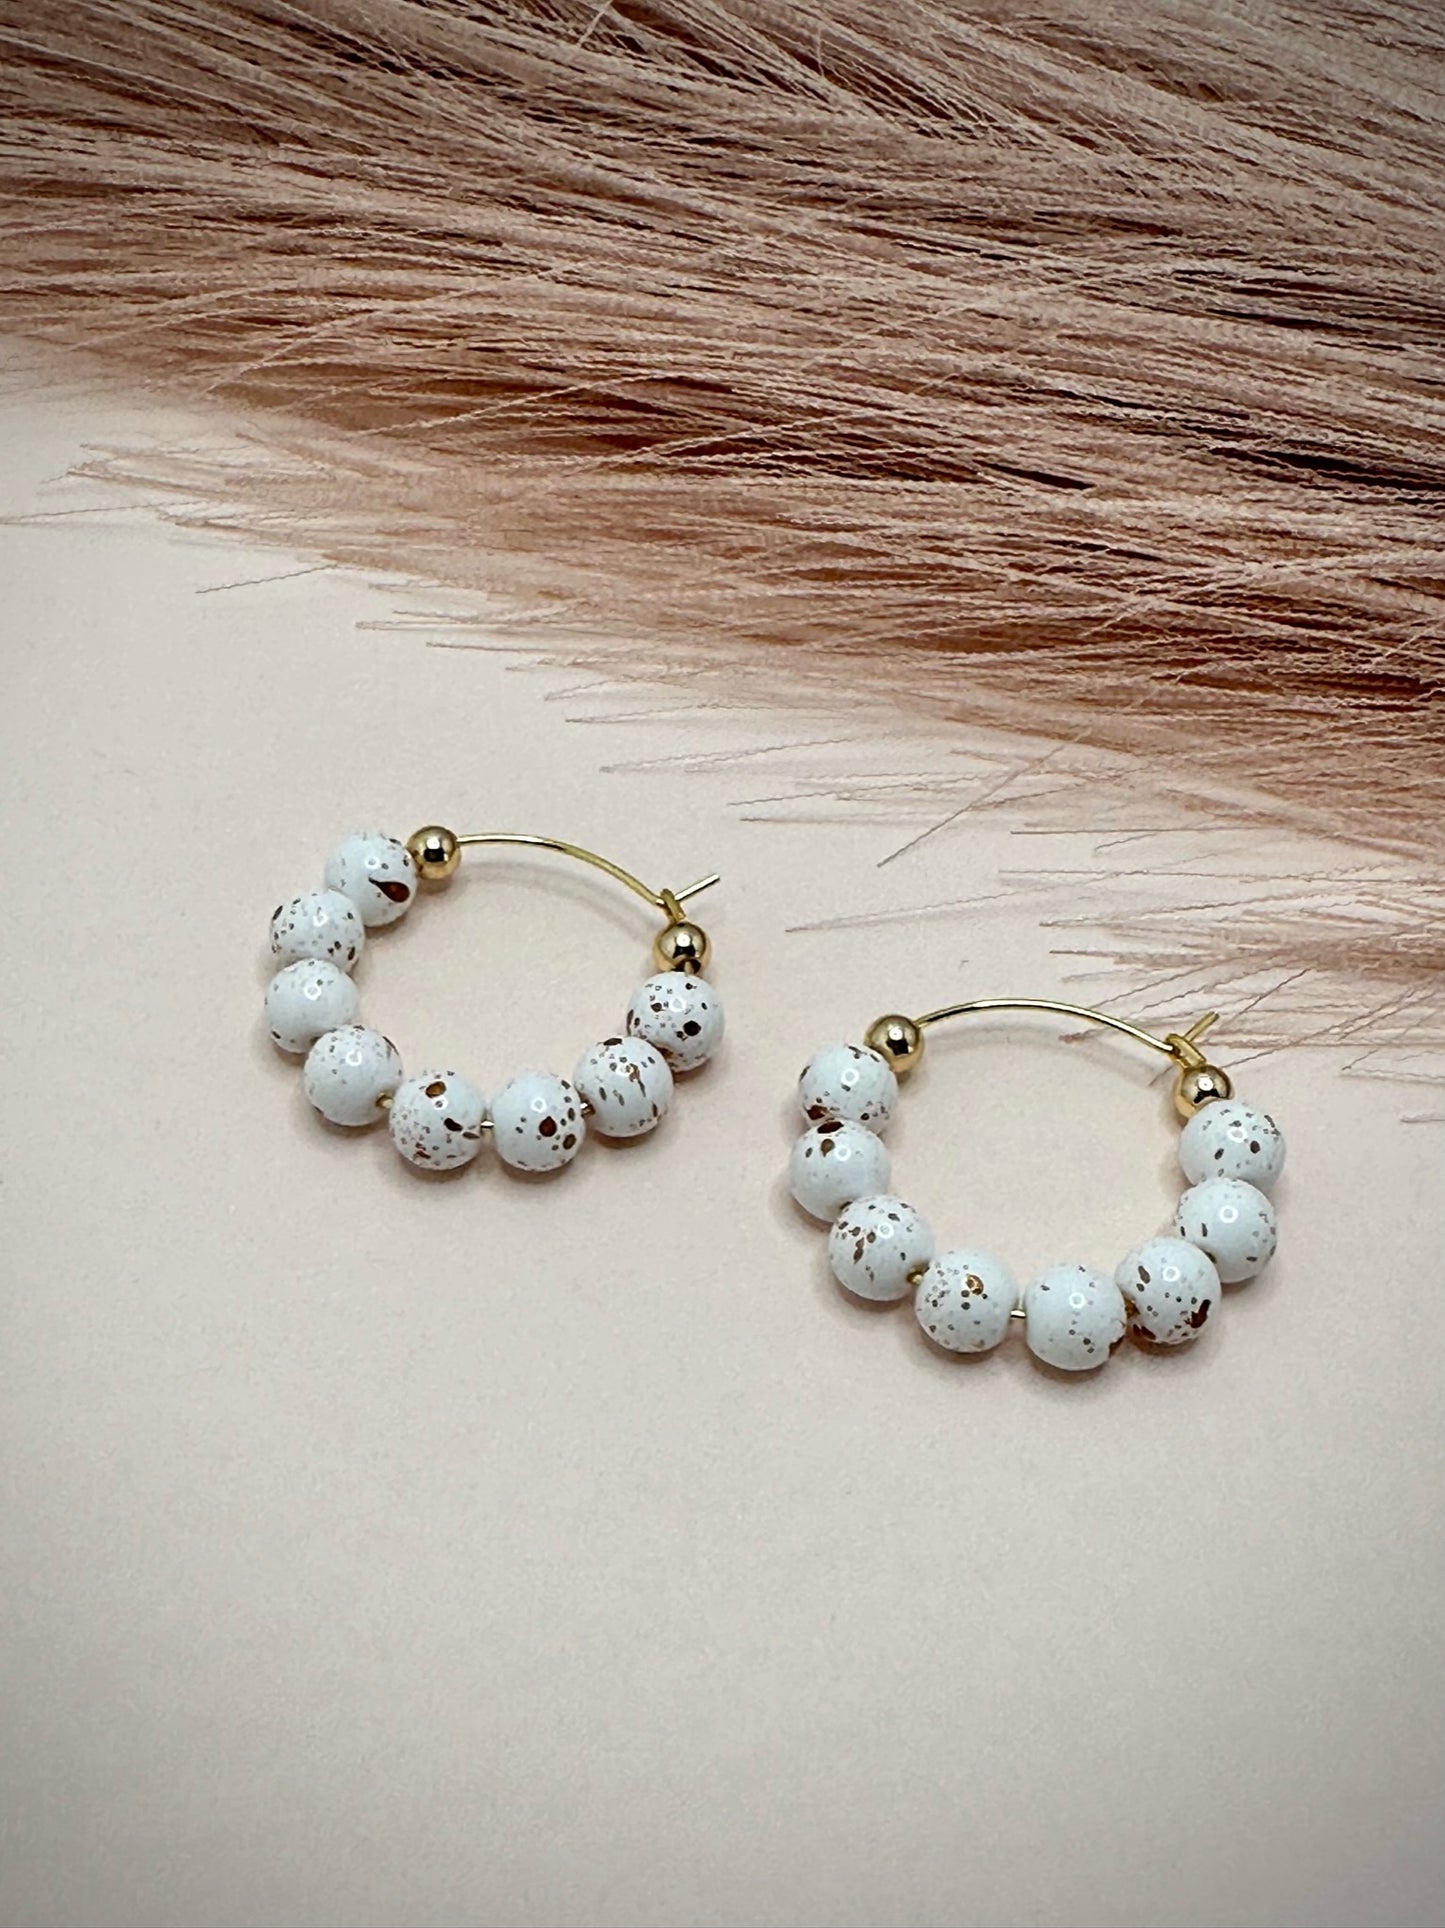 Small Hoop earring with white and gold beads